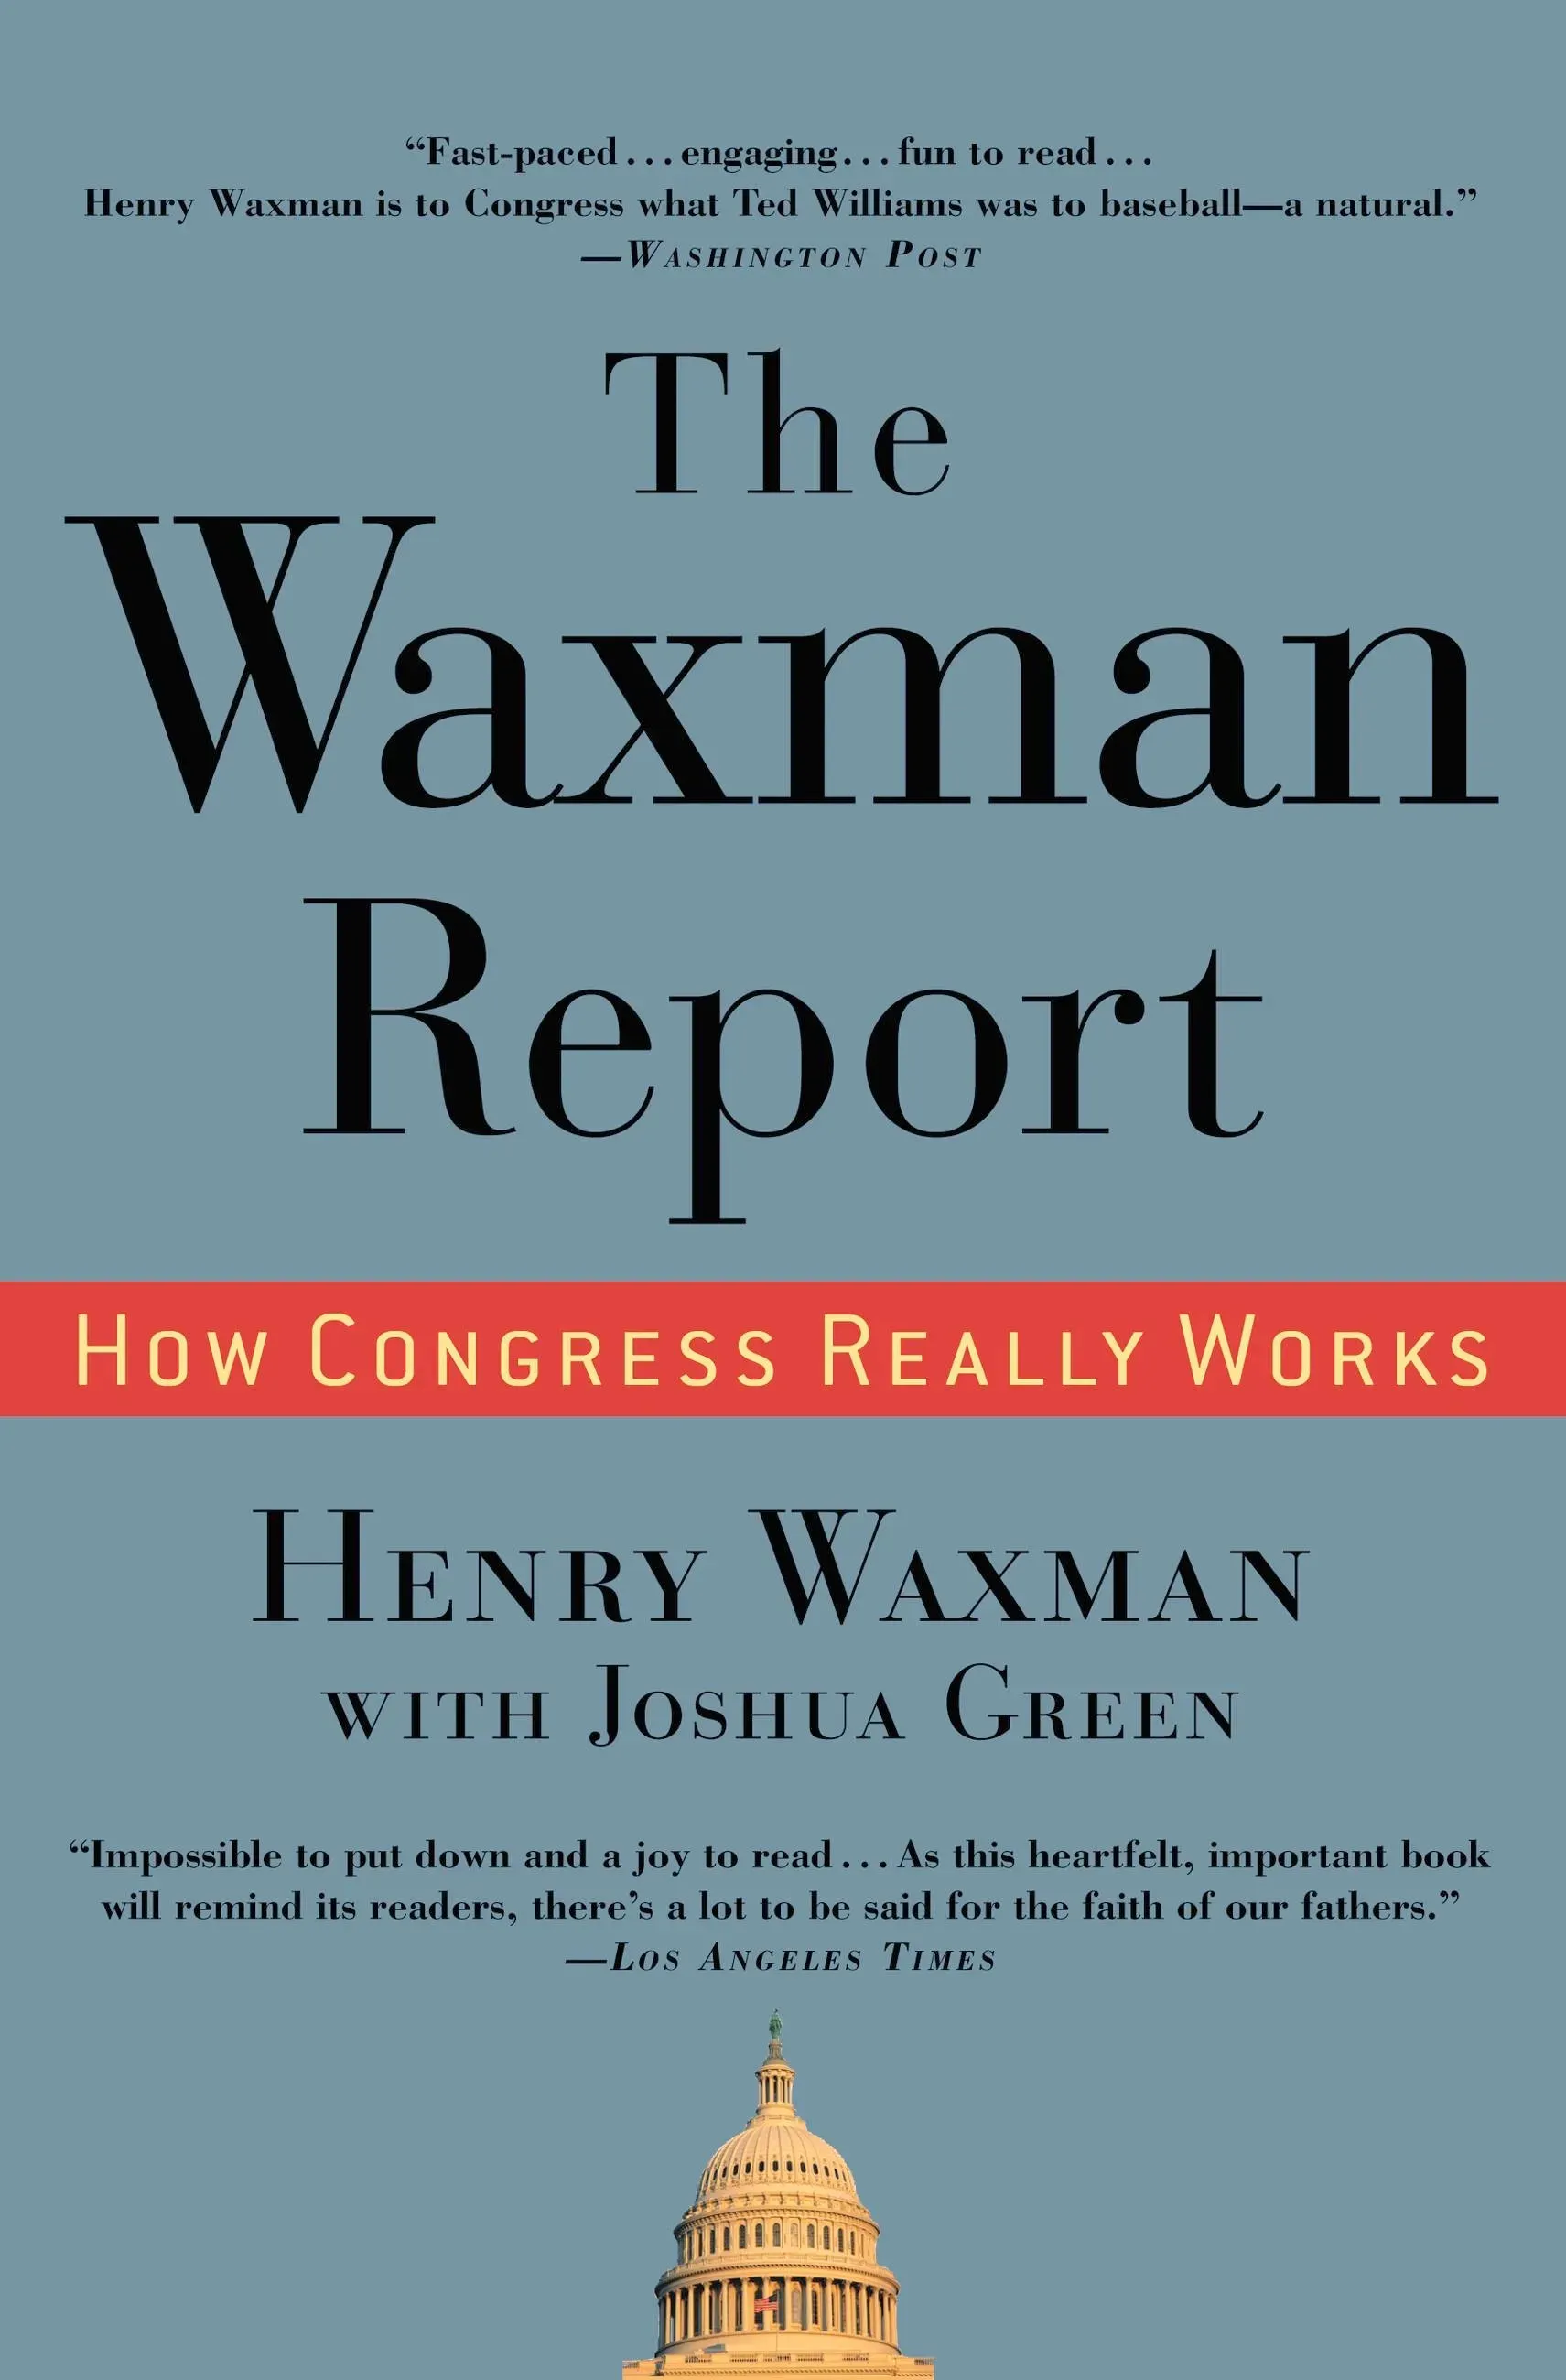 Cover of the book title The Waxman Report